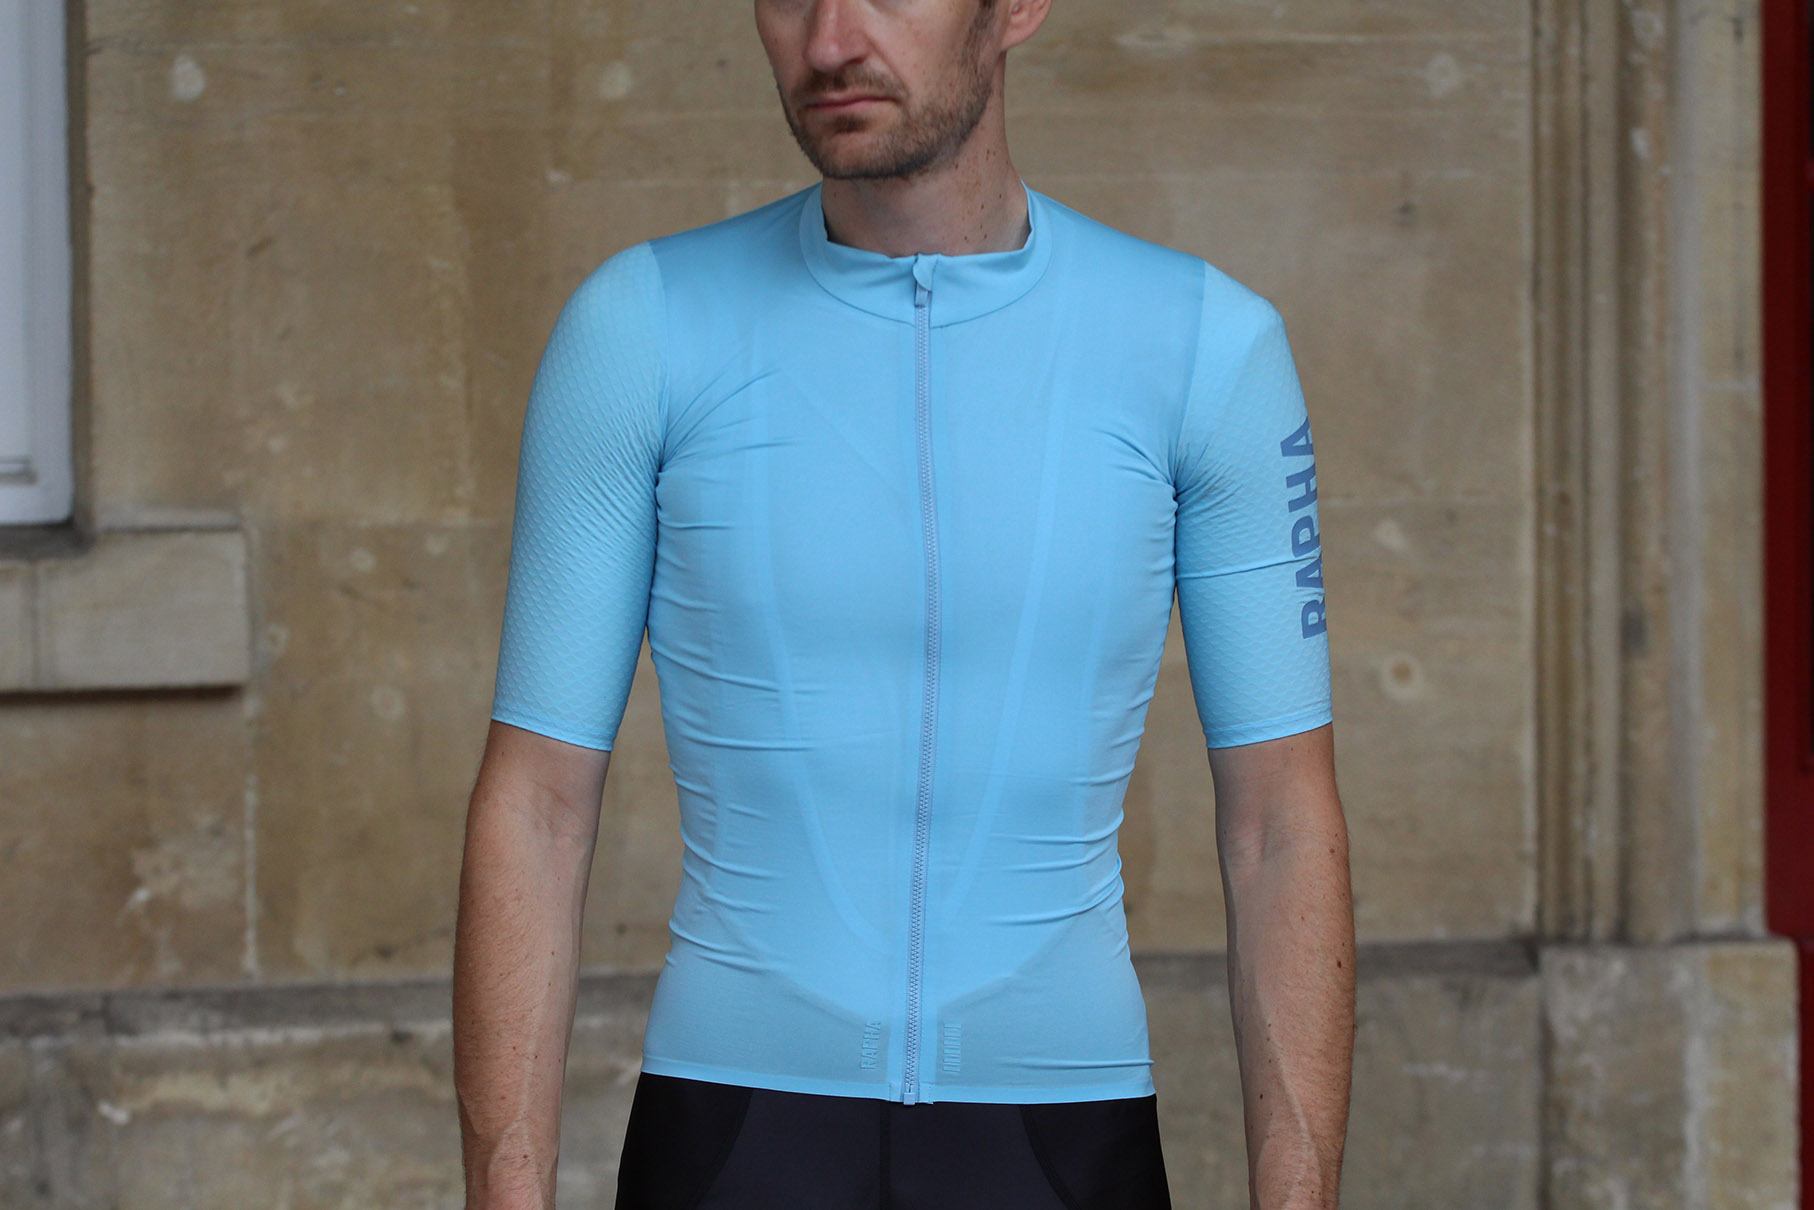 rapha jersey review